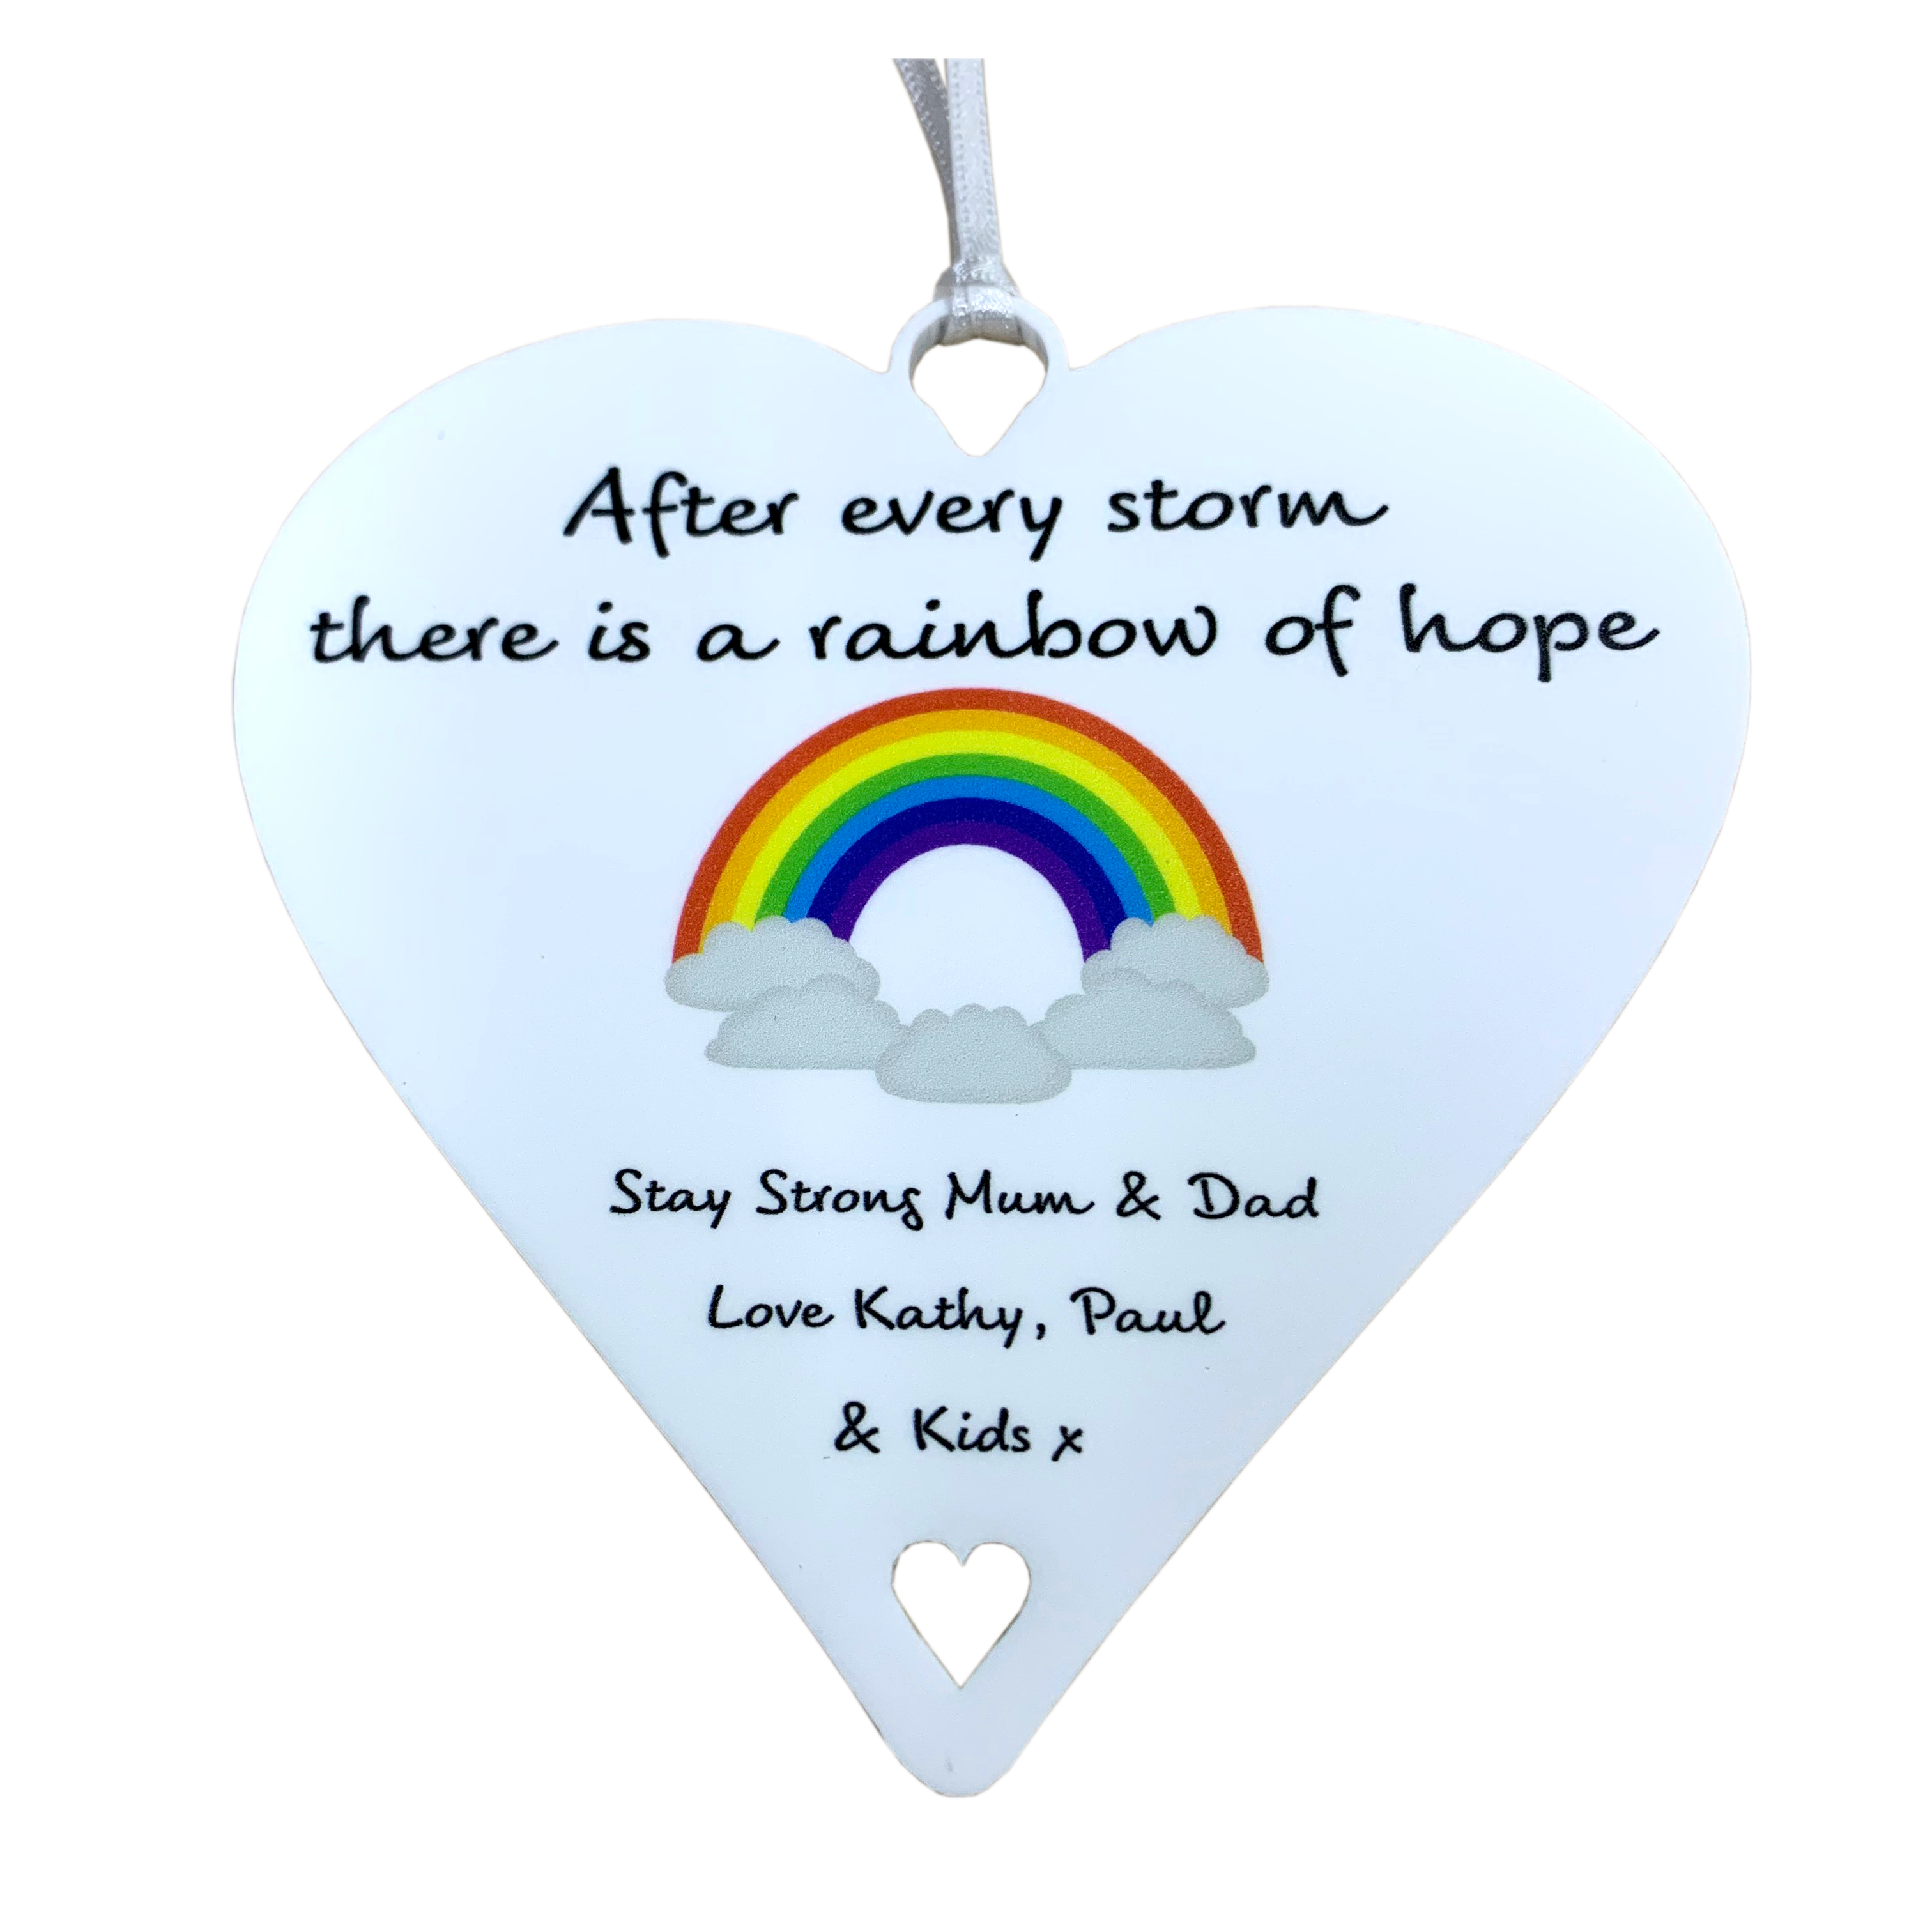 After every storm there is a rainbow of Hope Personalised Friendship Motivational Thank You Gifts - 10cm Heart